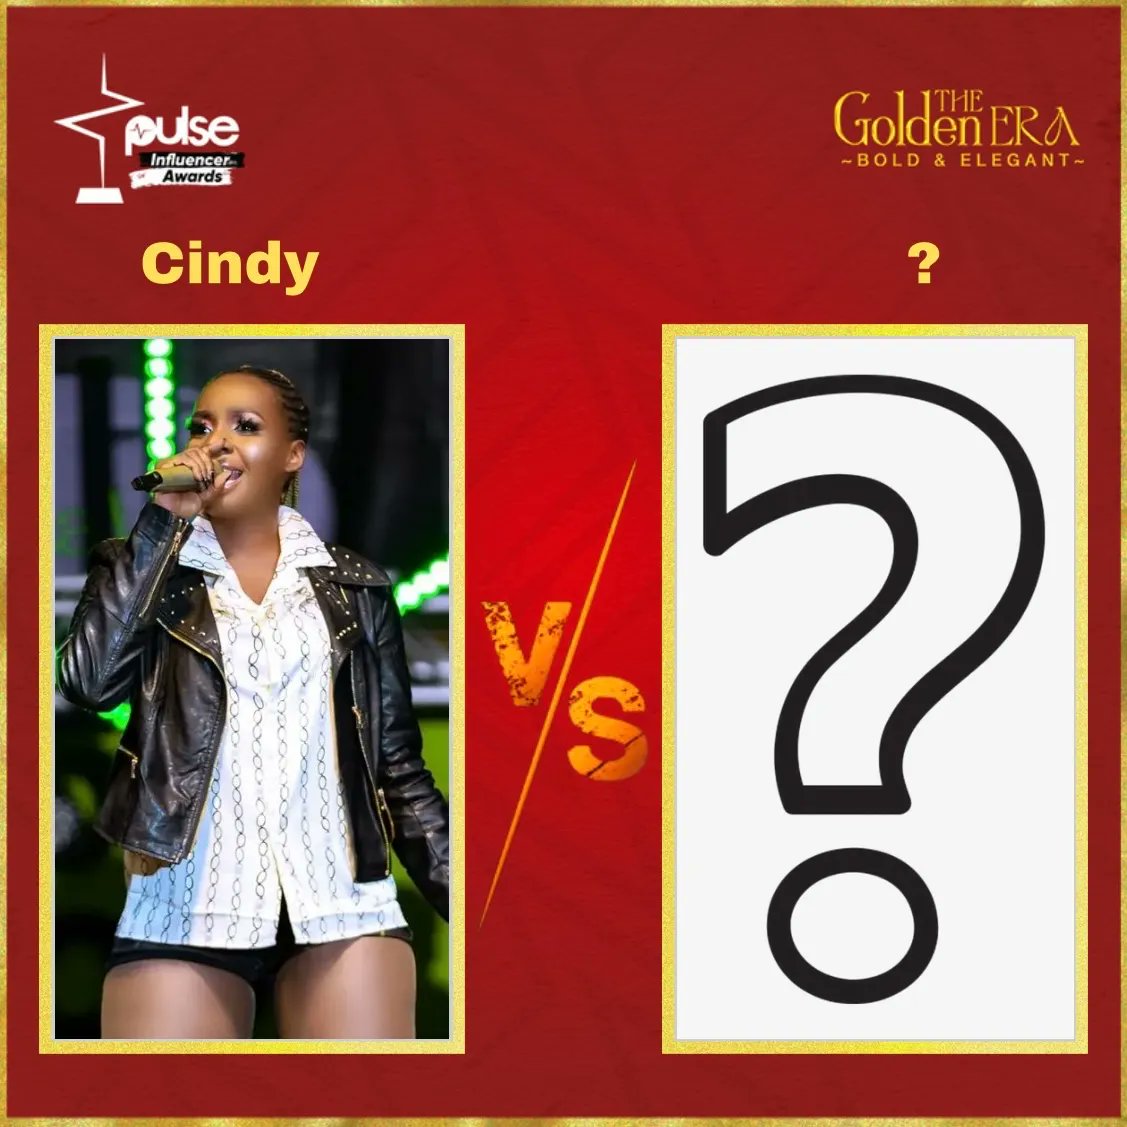 Yesterday Cindy proved she is the King of Live band, who do you think she should battle with ?

#PulseWantsToKnow 
#PulseInfluencerAwards
#CindyVsSheebah